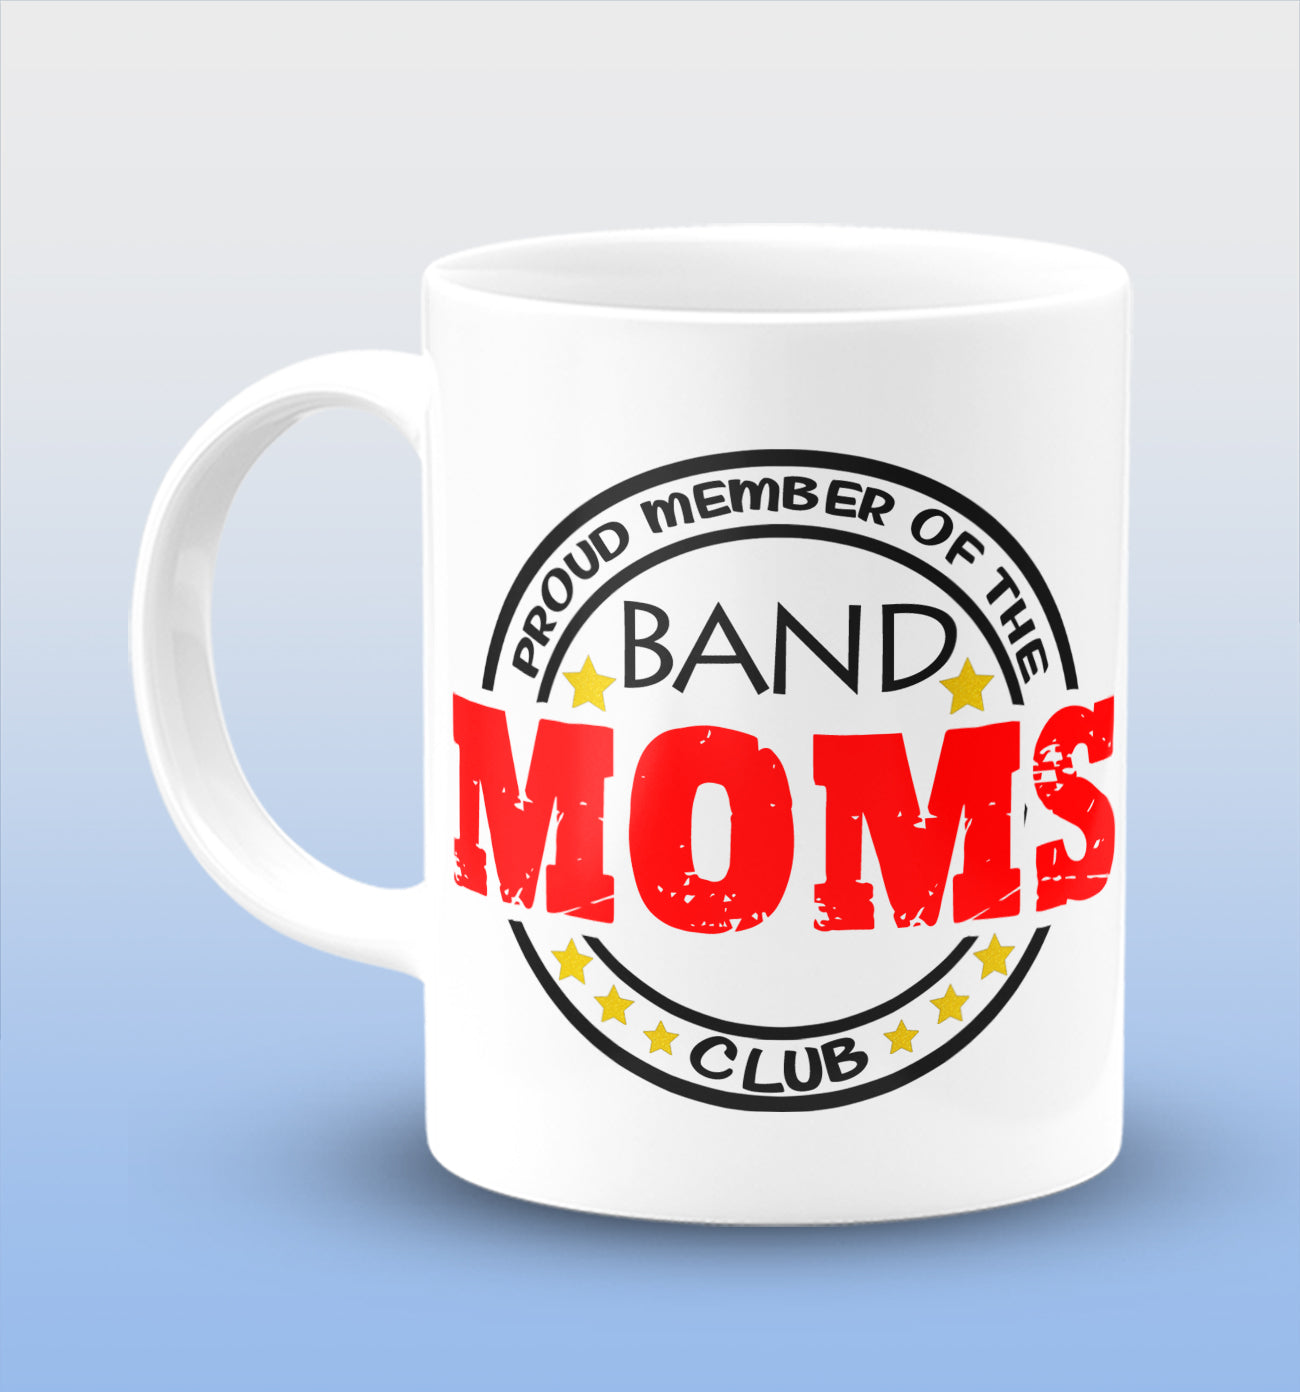 Proud Member Of The Band Moms Club White Cermic Coffee Mug 330 ml, Microwave & Dishwasher Safe| CM-R191